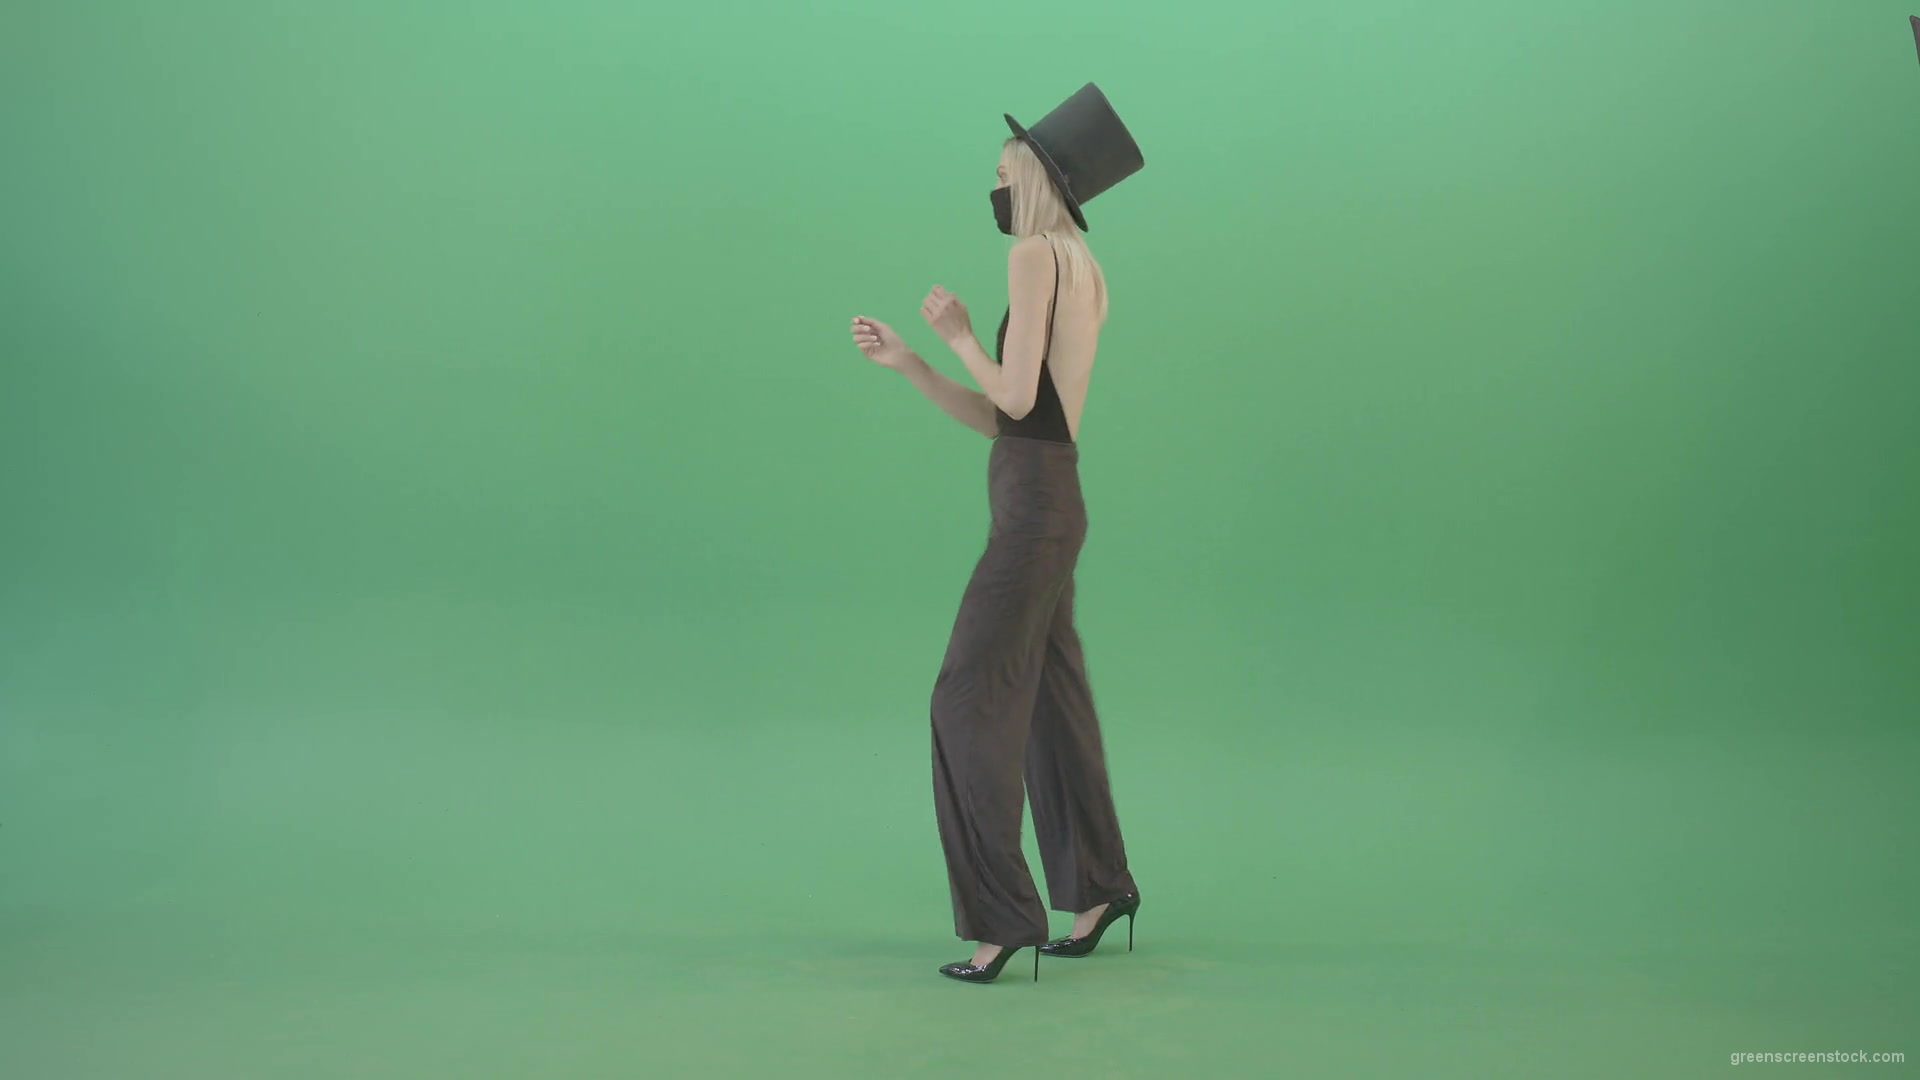 Covid-Mask-Girl-in-Black-cylinder-Hat-dancing-in-front-and-back-side-view-isolated-on-green-screen-Video-Footage-1920_005 Green Screen Stock